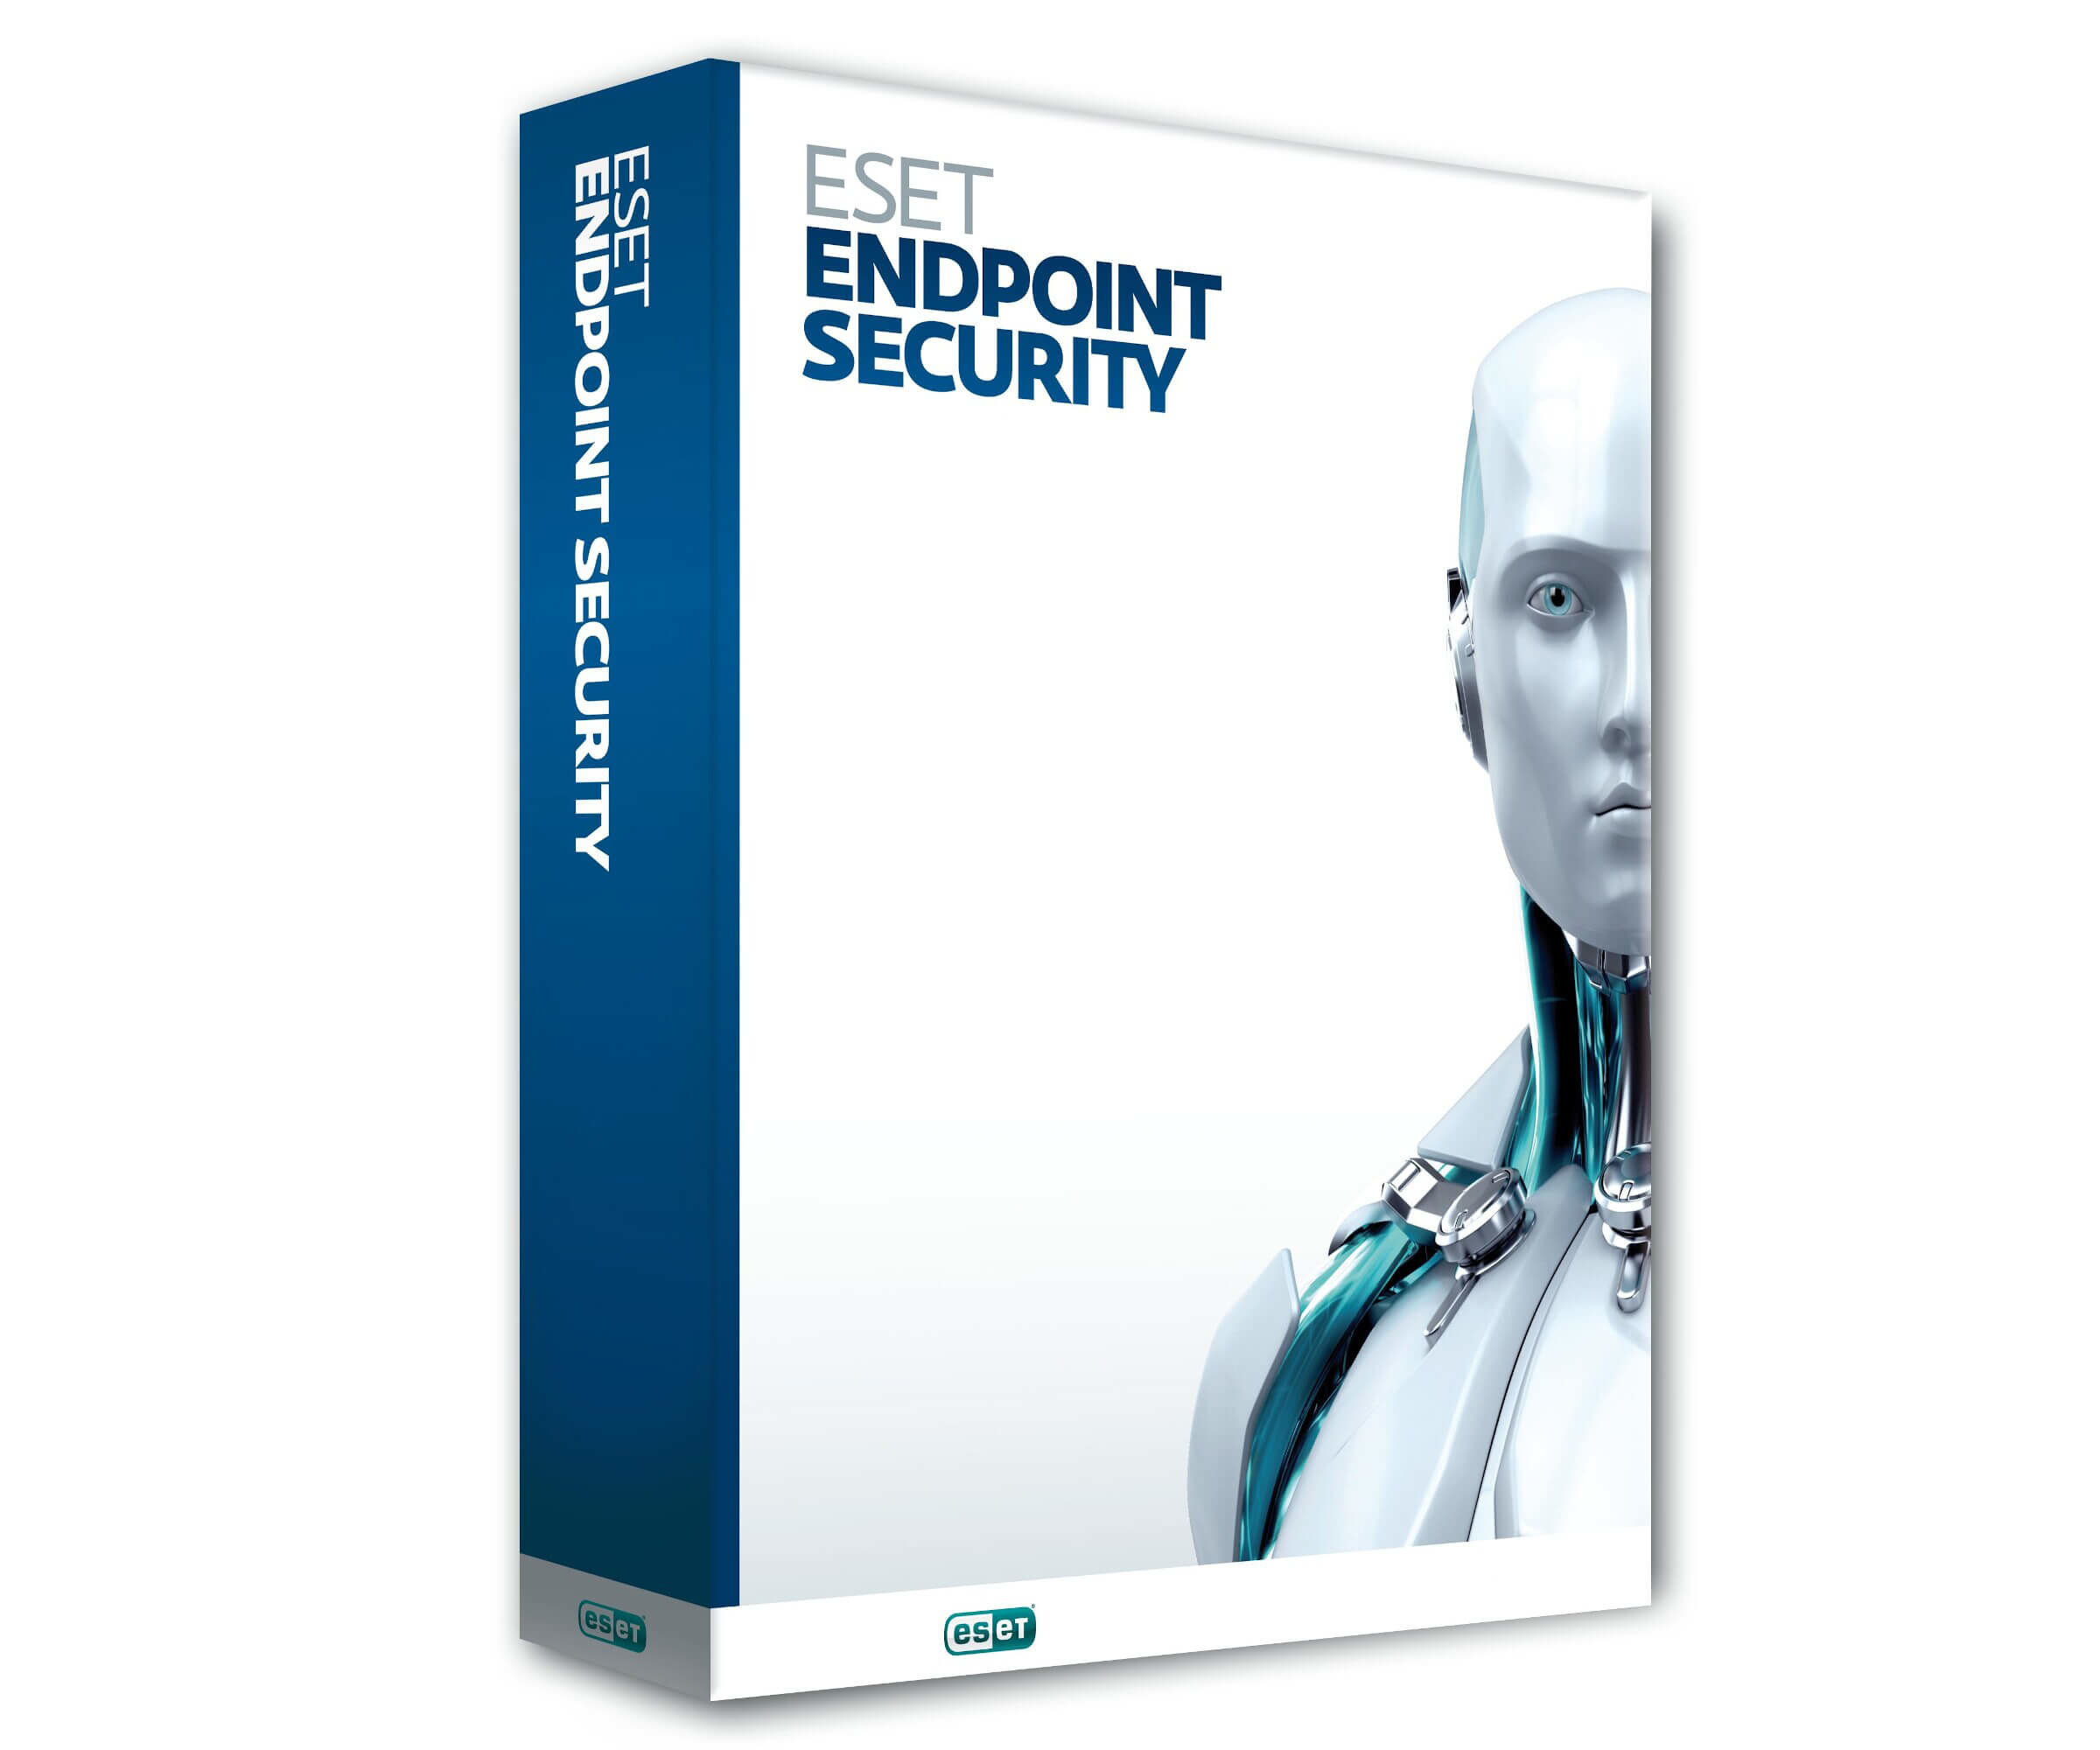 download the last version for ios ESET Endpoint Security 10.1.2050.0